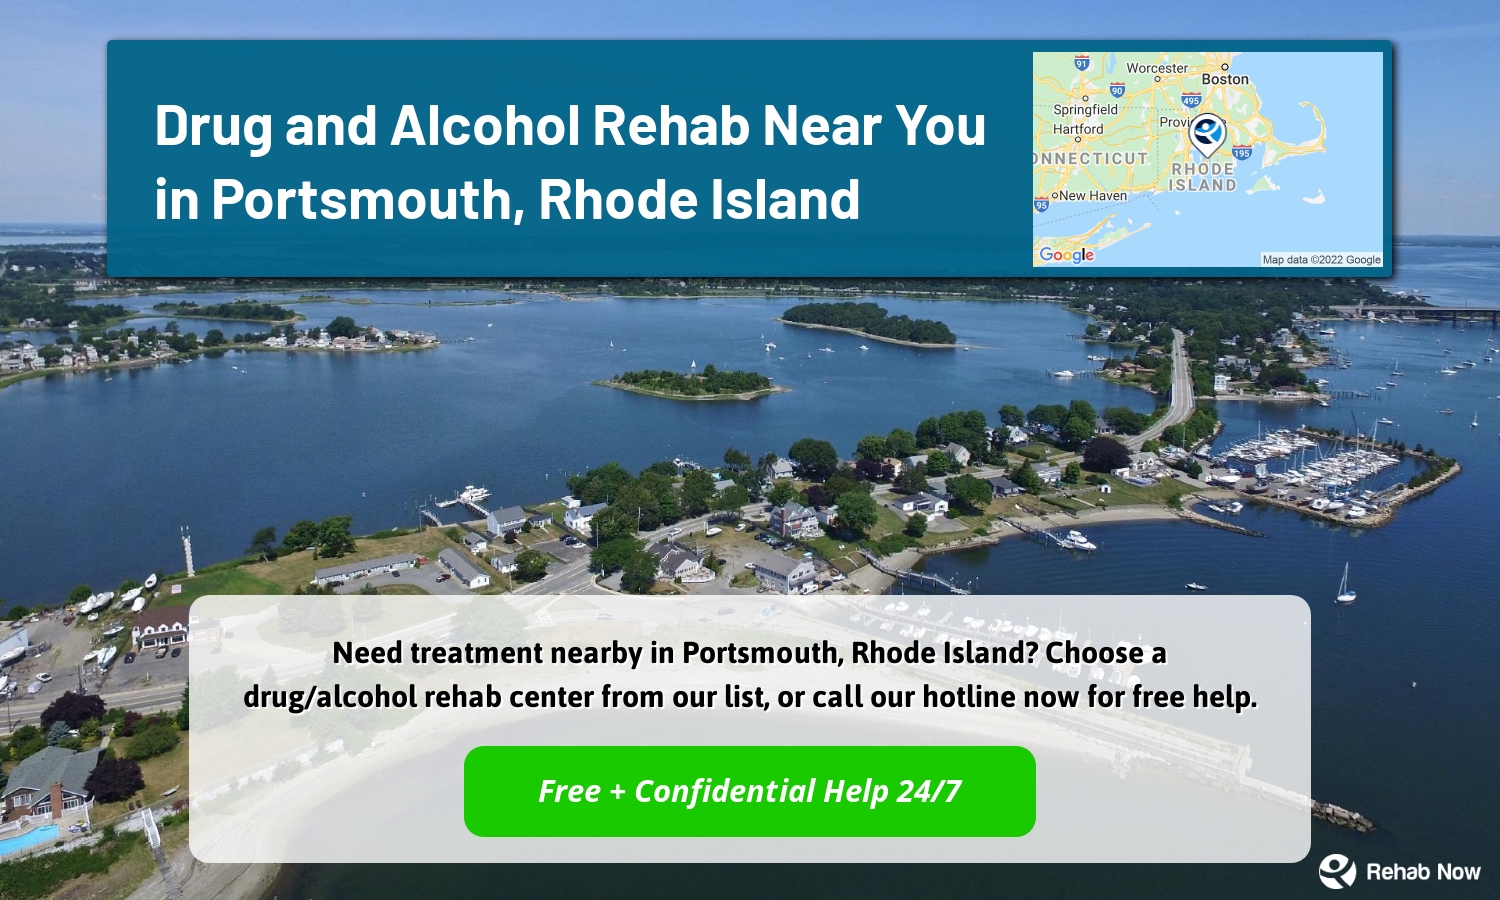 Need treatment nearby in Portsmouth, Rhode Island? Choose a drug/alcohol rehab center from our list, or call our hotline now for free help.